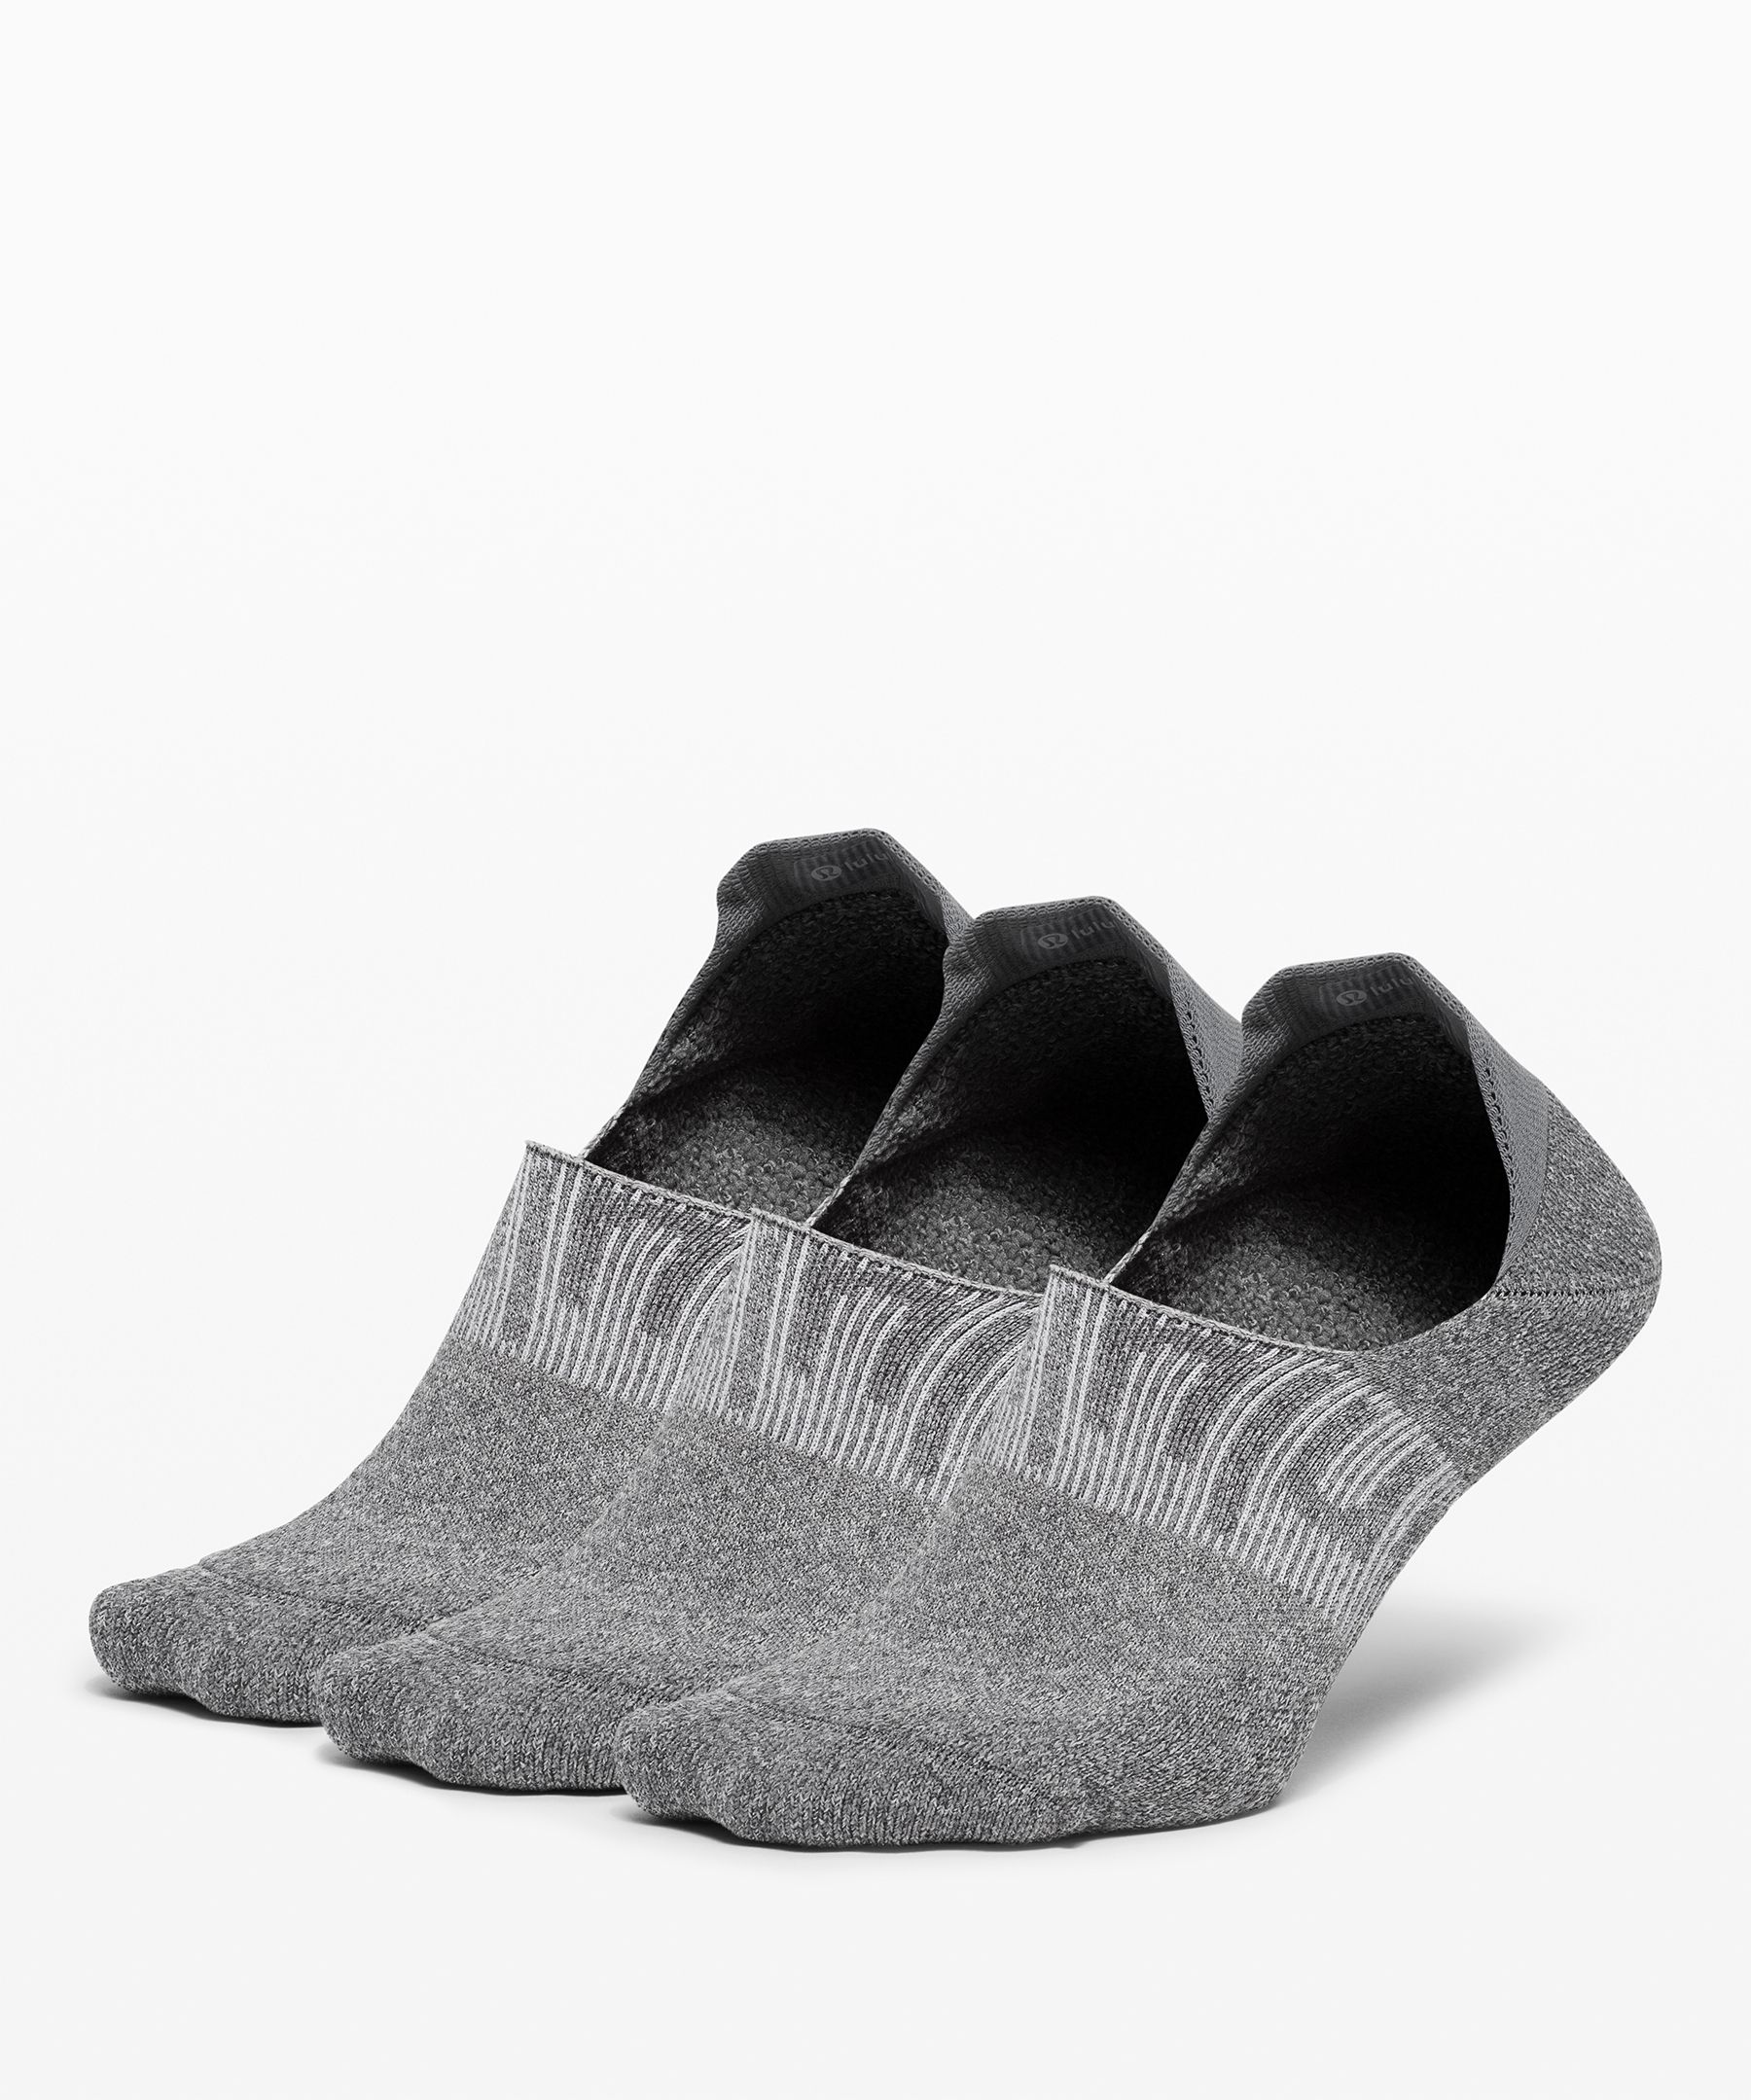 Lululemon Power Stride No-show Socks With Active Grip Anti-stink 3 Pack In Heathered Graphite Grey